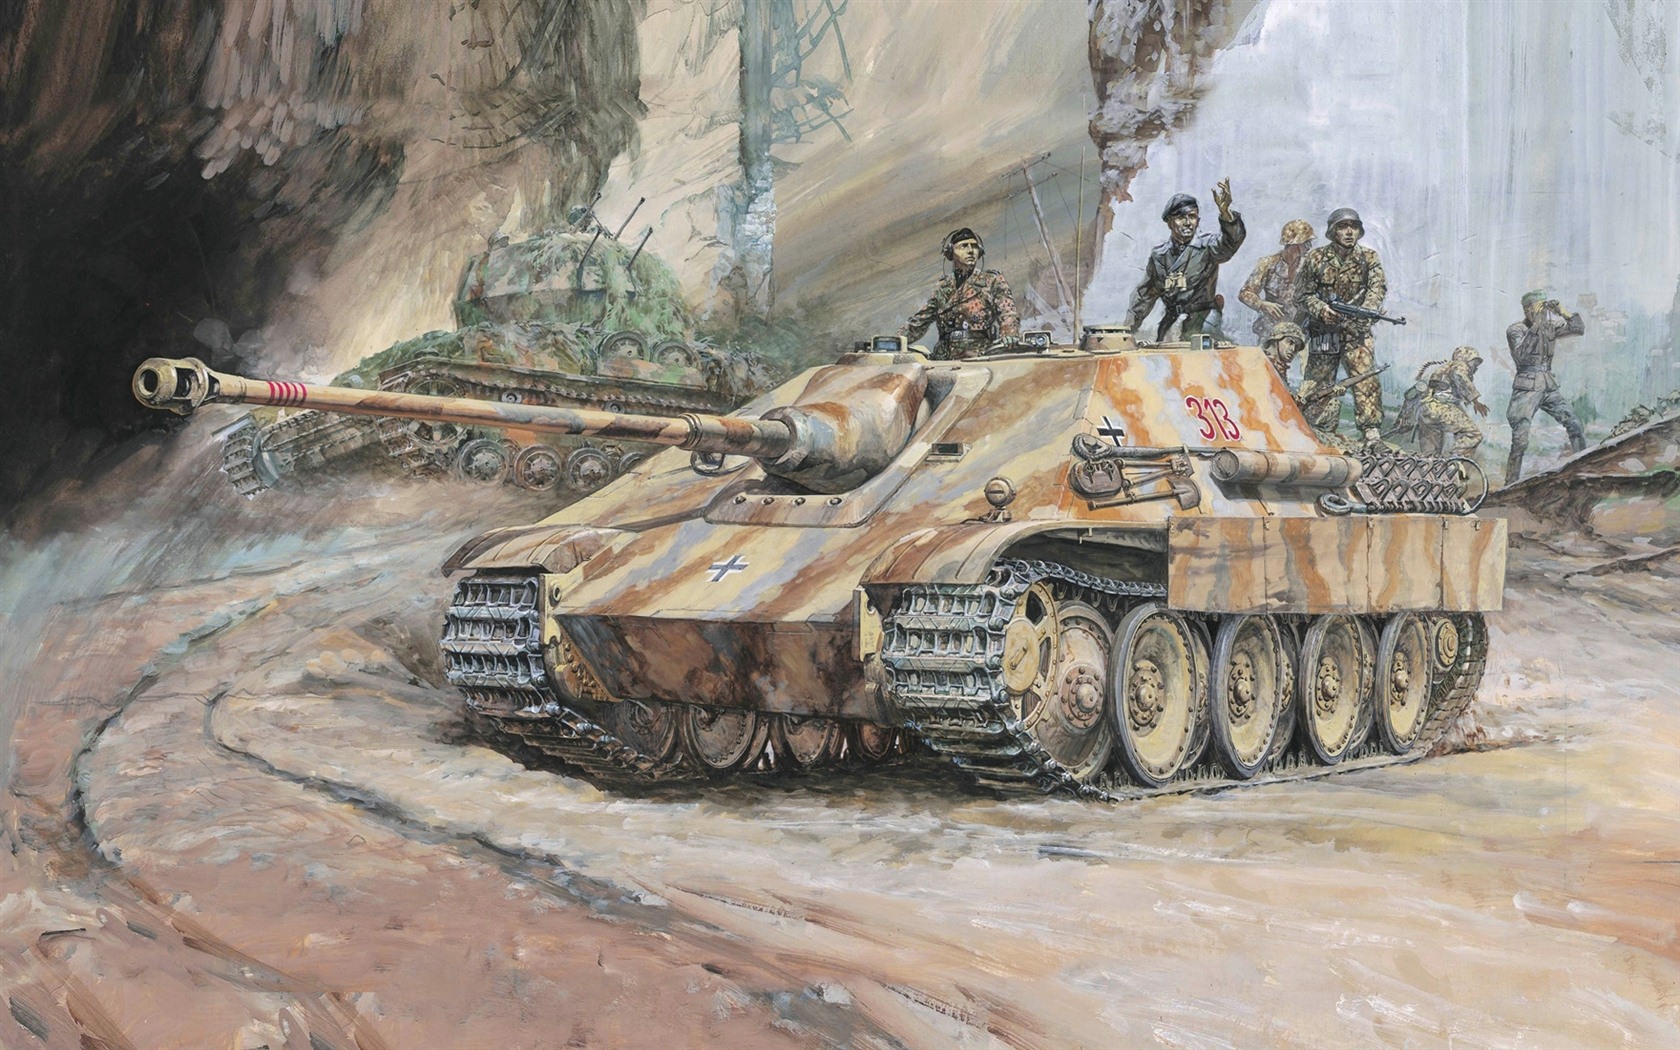 Military tanks, armored HD painting wallpapers #4 - 1680x1050